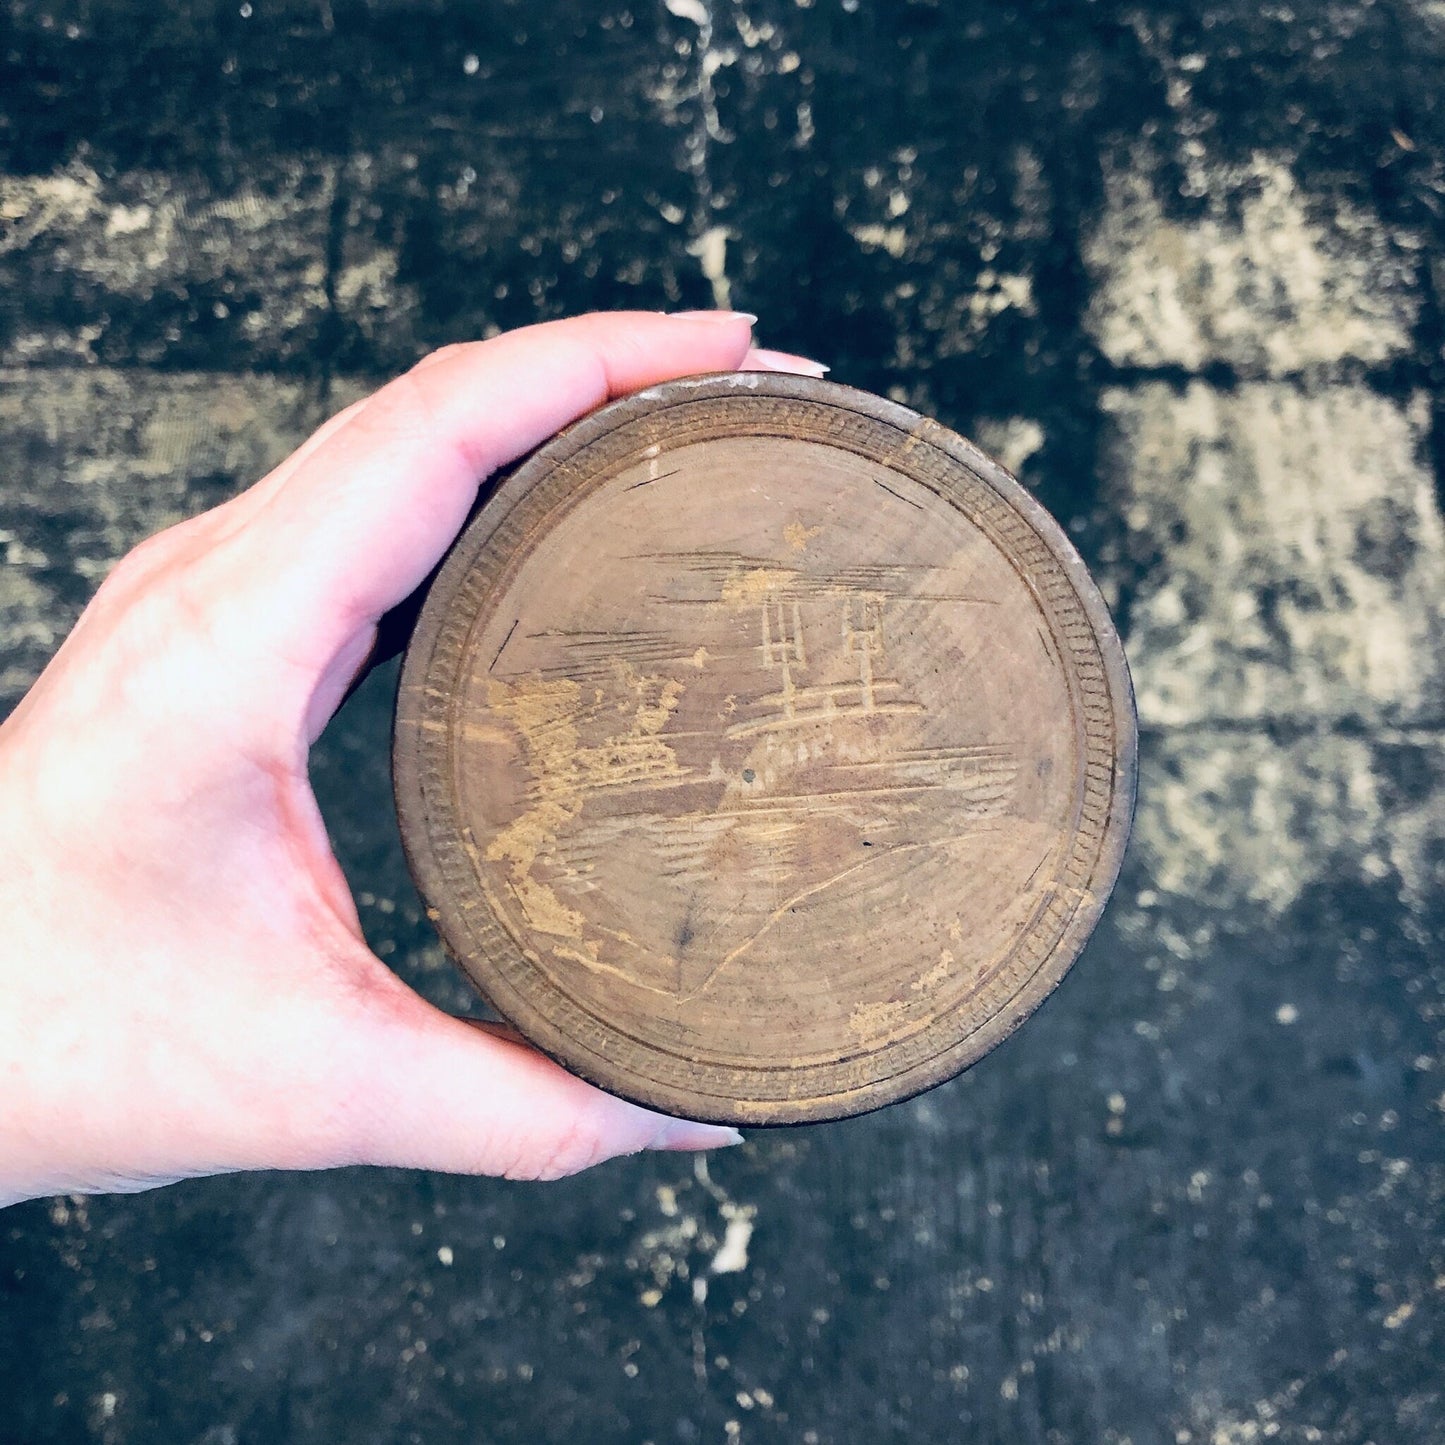 Hand holding a vintage, round wooden trinket box with intricate carvings, against a grungy concrete background.